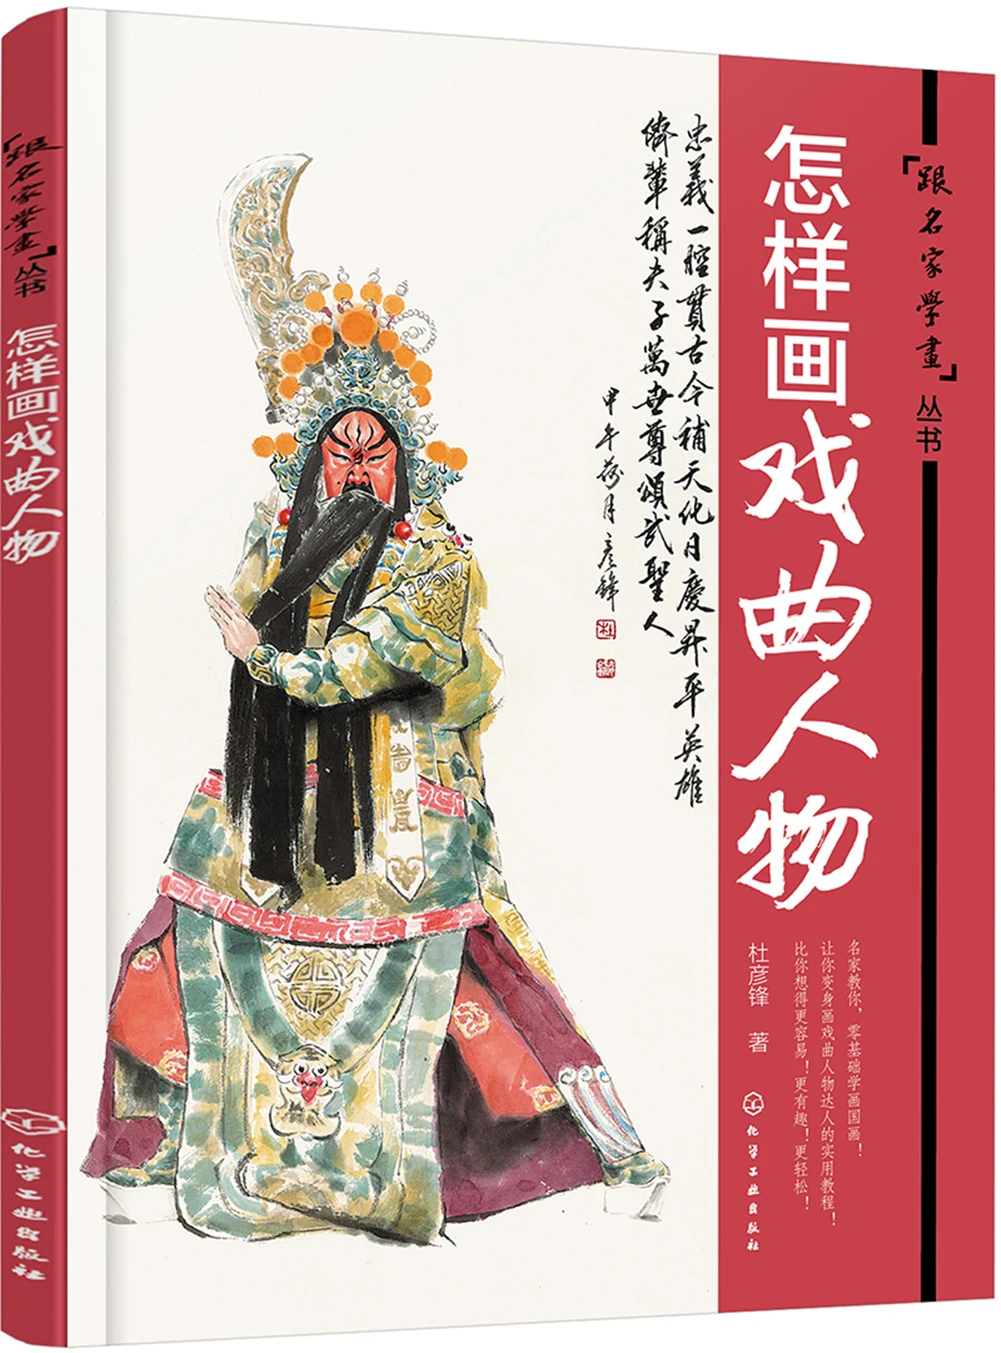 

Chinese traditional painting art book Learn Painting Series from Famous Artists--How to Draw Opera Characters